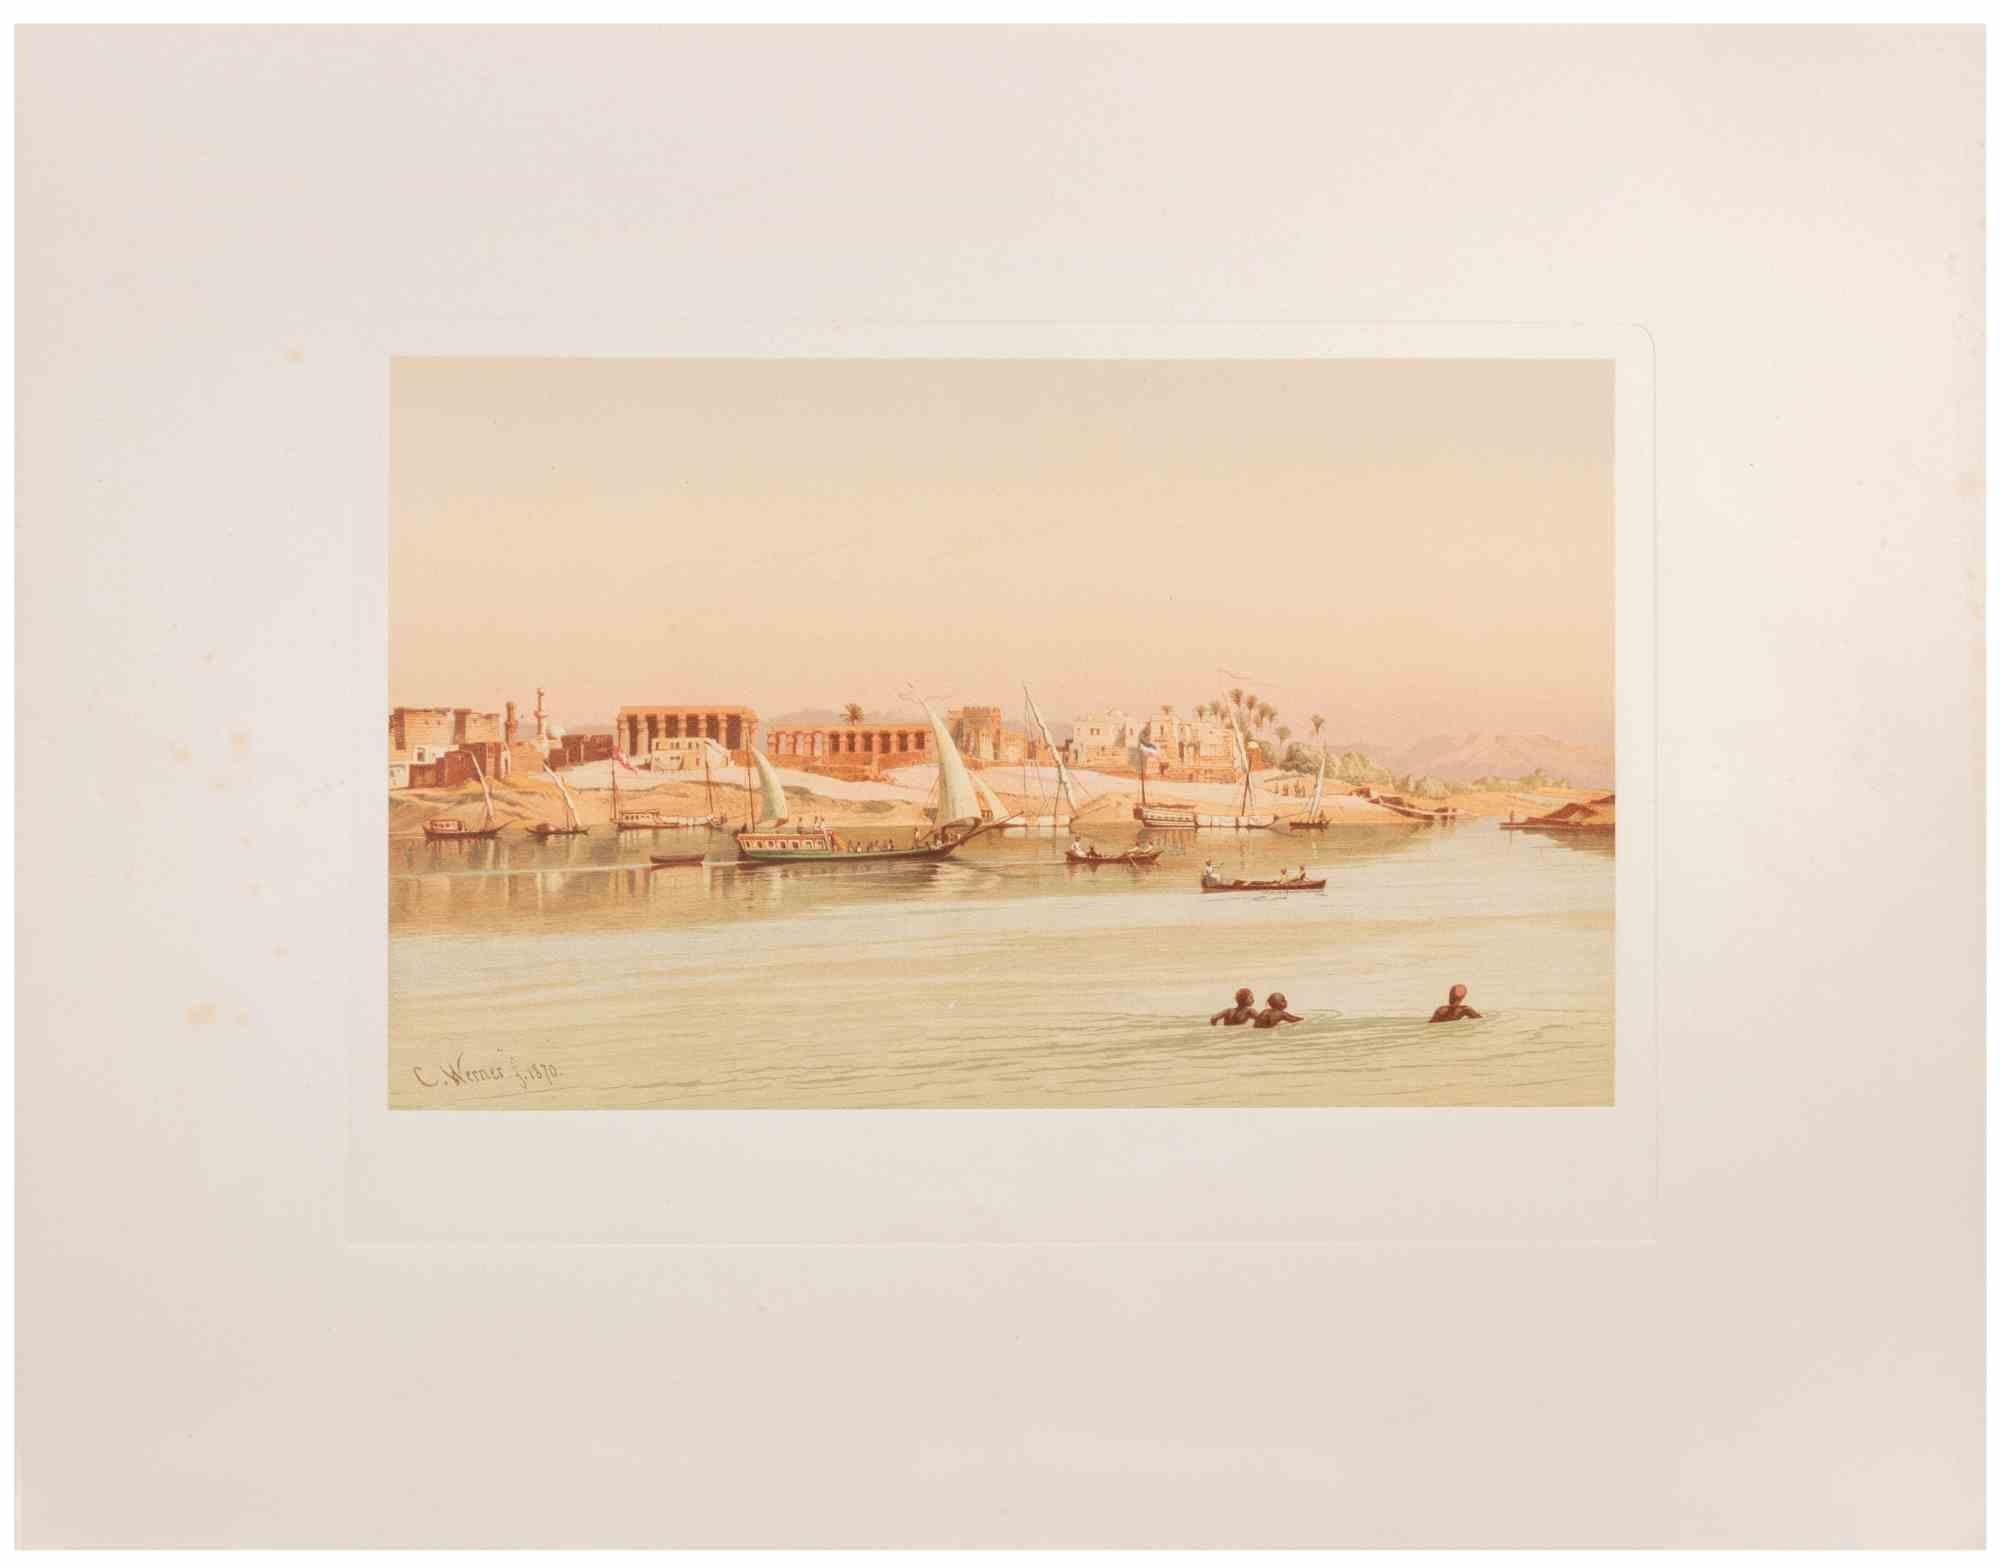 Along the Nile is a modern artwork realized d'apres Karl Werner 

Mixed colored Chromolithograph. 

The artwork is after the watercolors realized by the artist during a trip to Egypt between 1862 and 1865.

This edition is from 1881.

Signed on